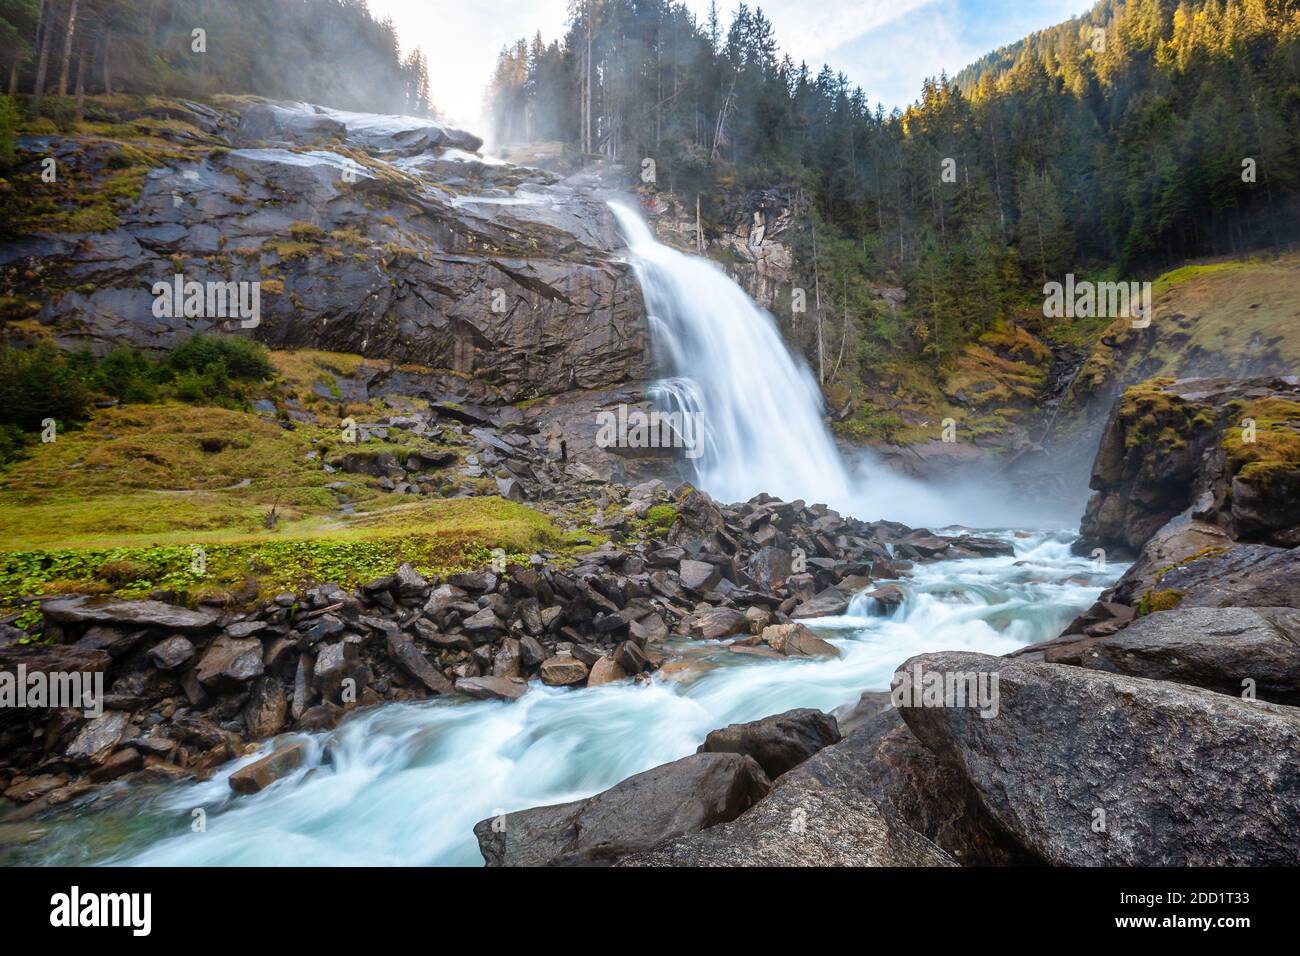 The Krimmler Waterfalls in Krimml, Austria are the highes in Europe. Stock Photo